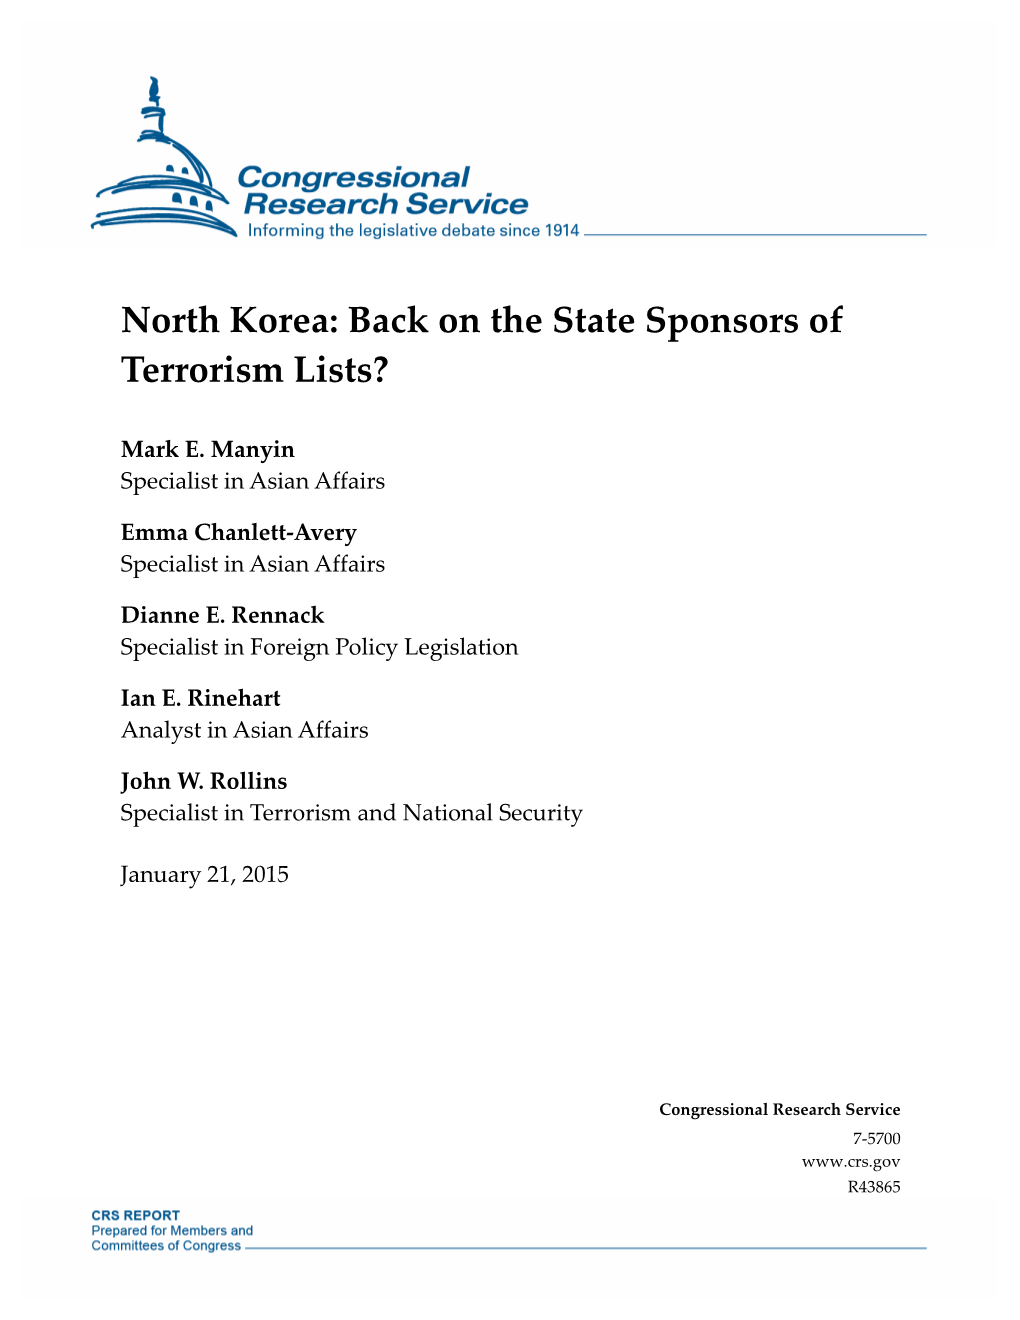 North Korea: Back on the State Sponsors of Terrorism Lists?